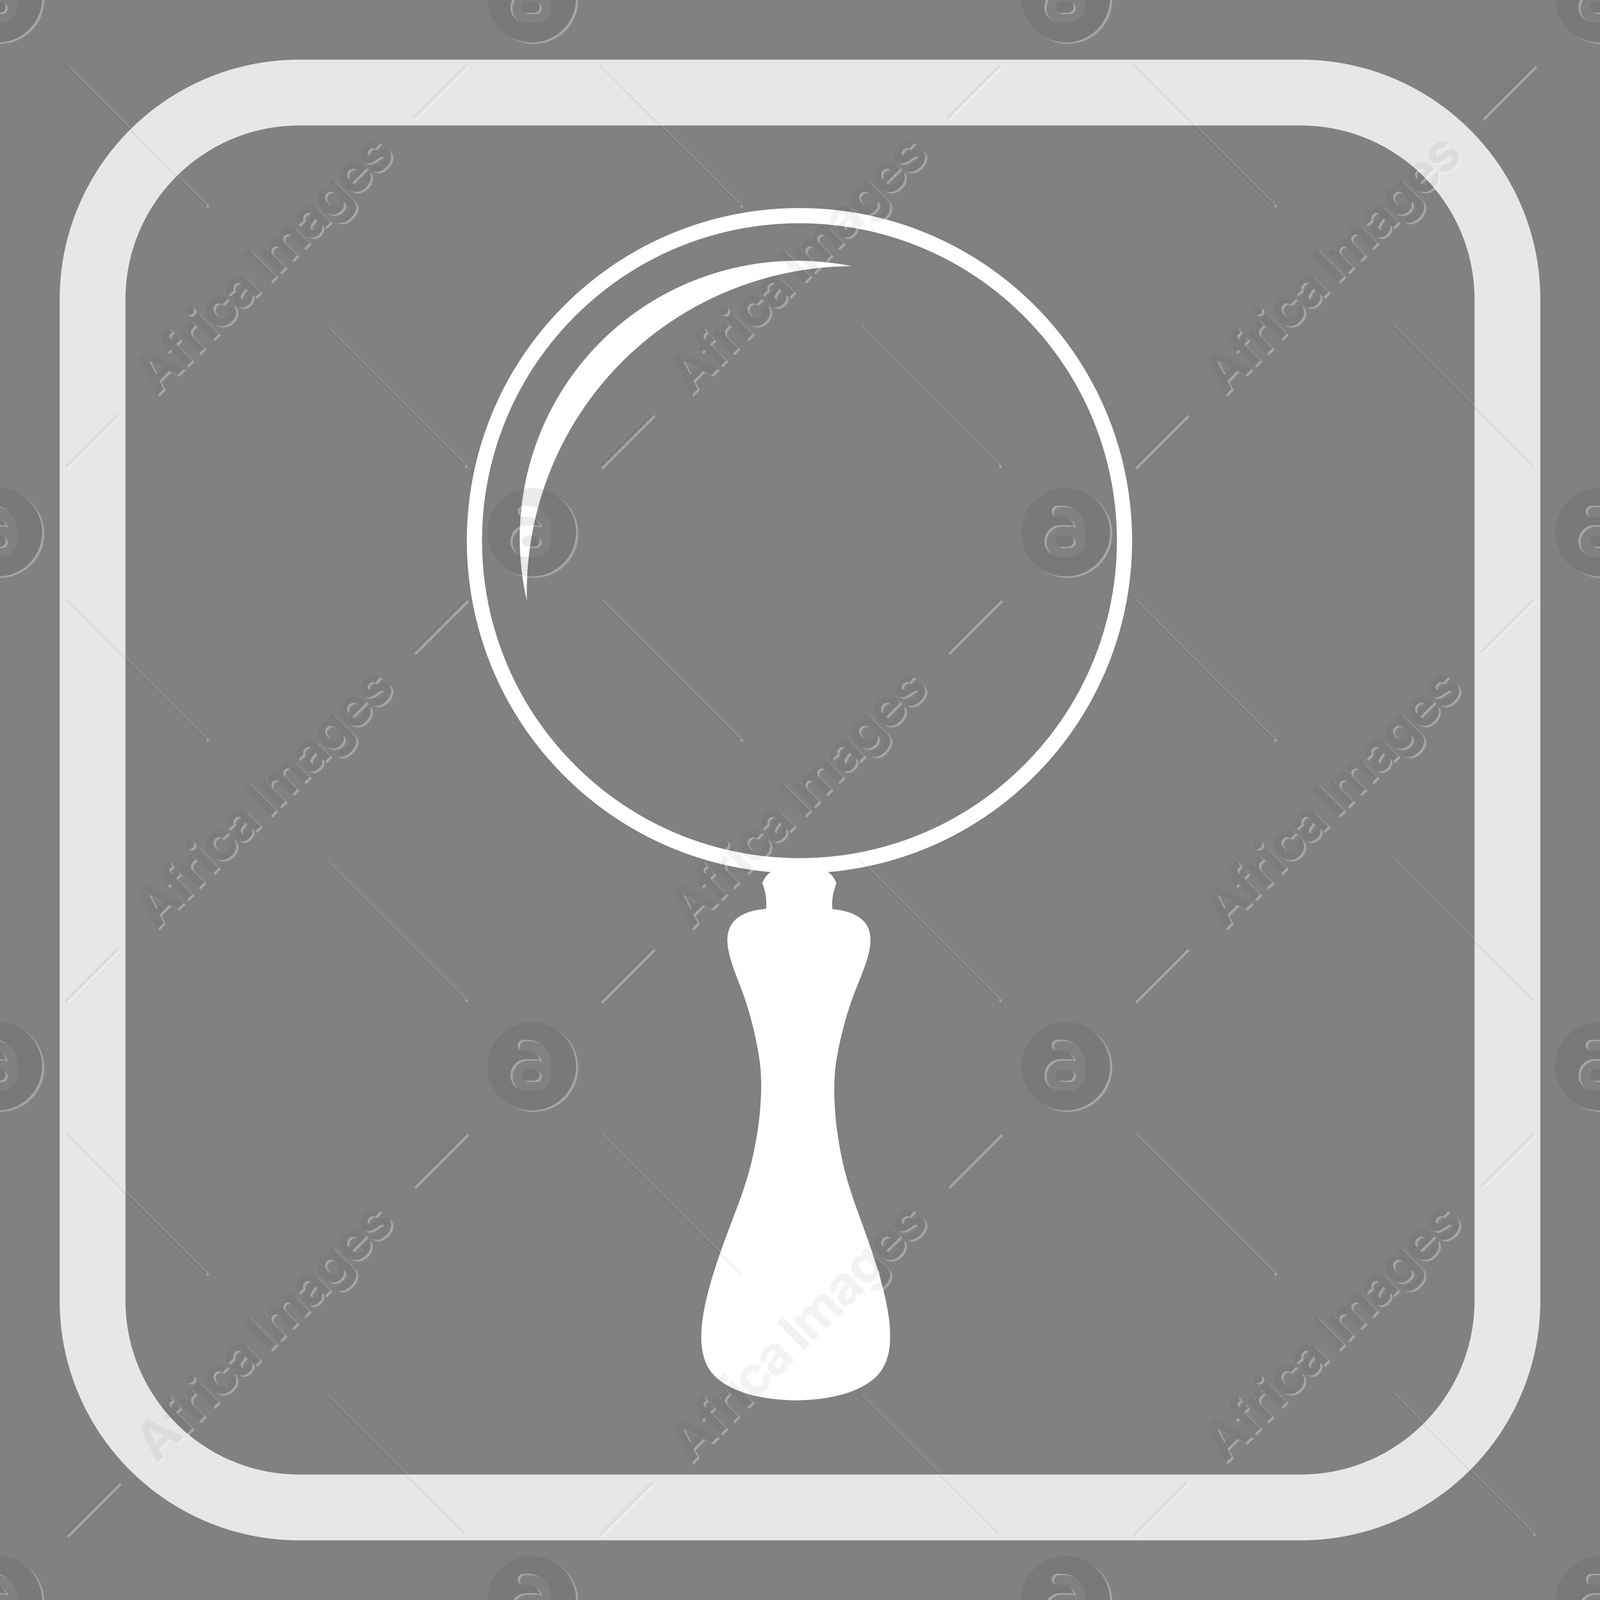 Image of Magnifying glass in frame, illustration on grey background